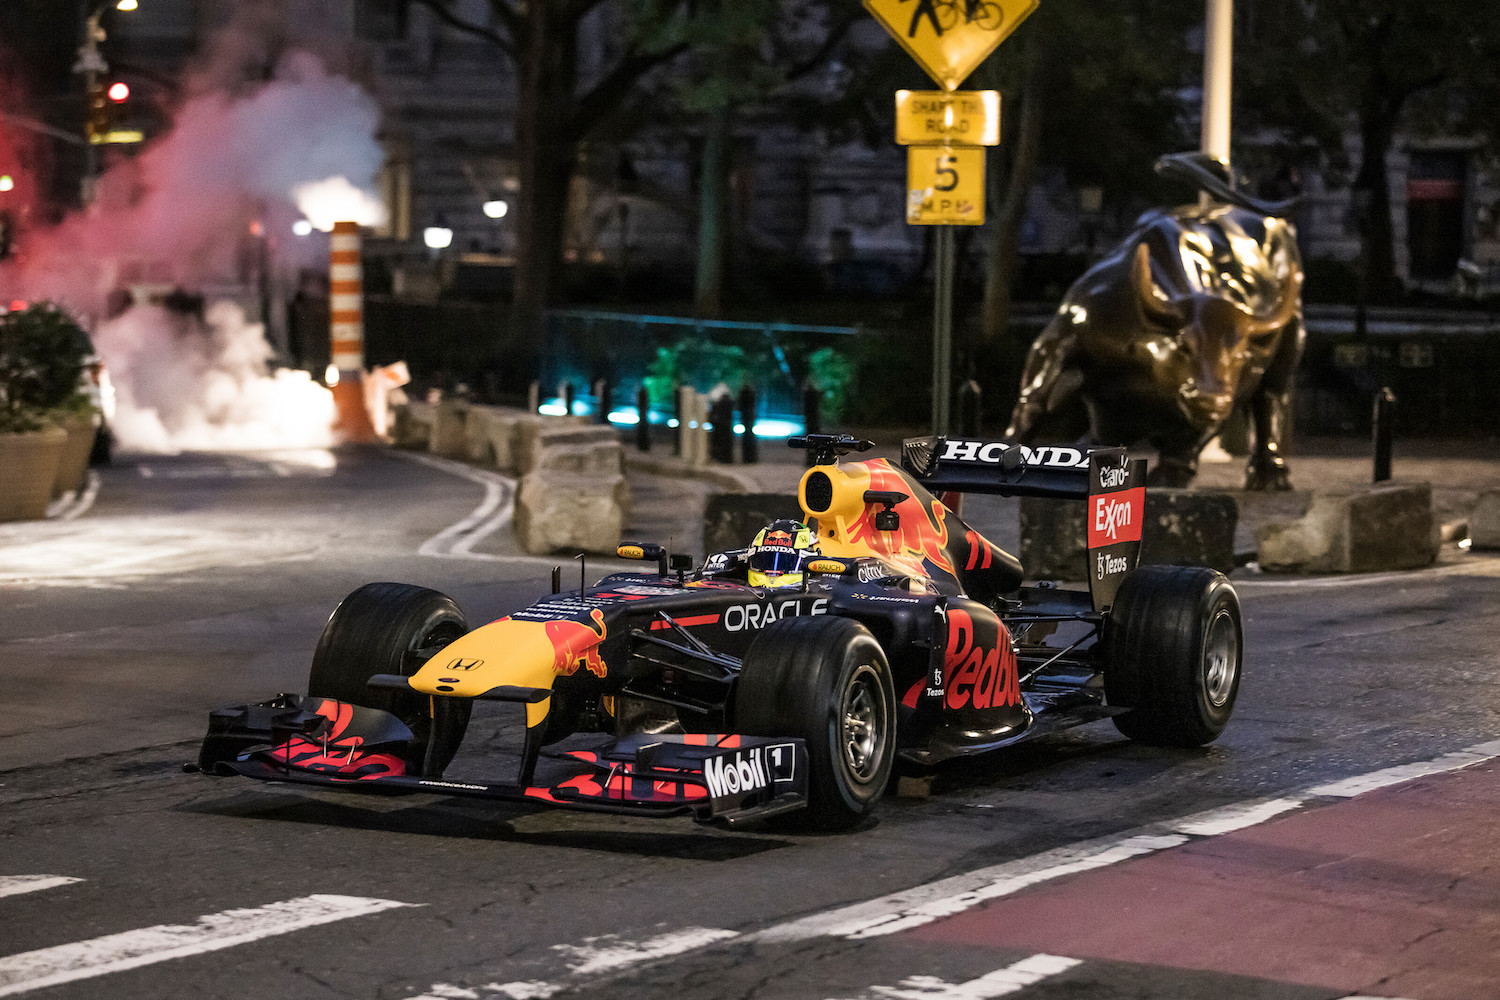 This is a publicity photo of Red Bull Racing's RB7 F1 car in New York City. The driver hooned around Manhattan, revving the engine and even drifting into a parking spot. | Red Bull Racing